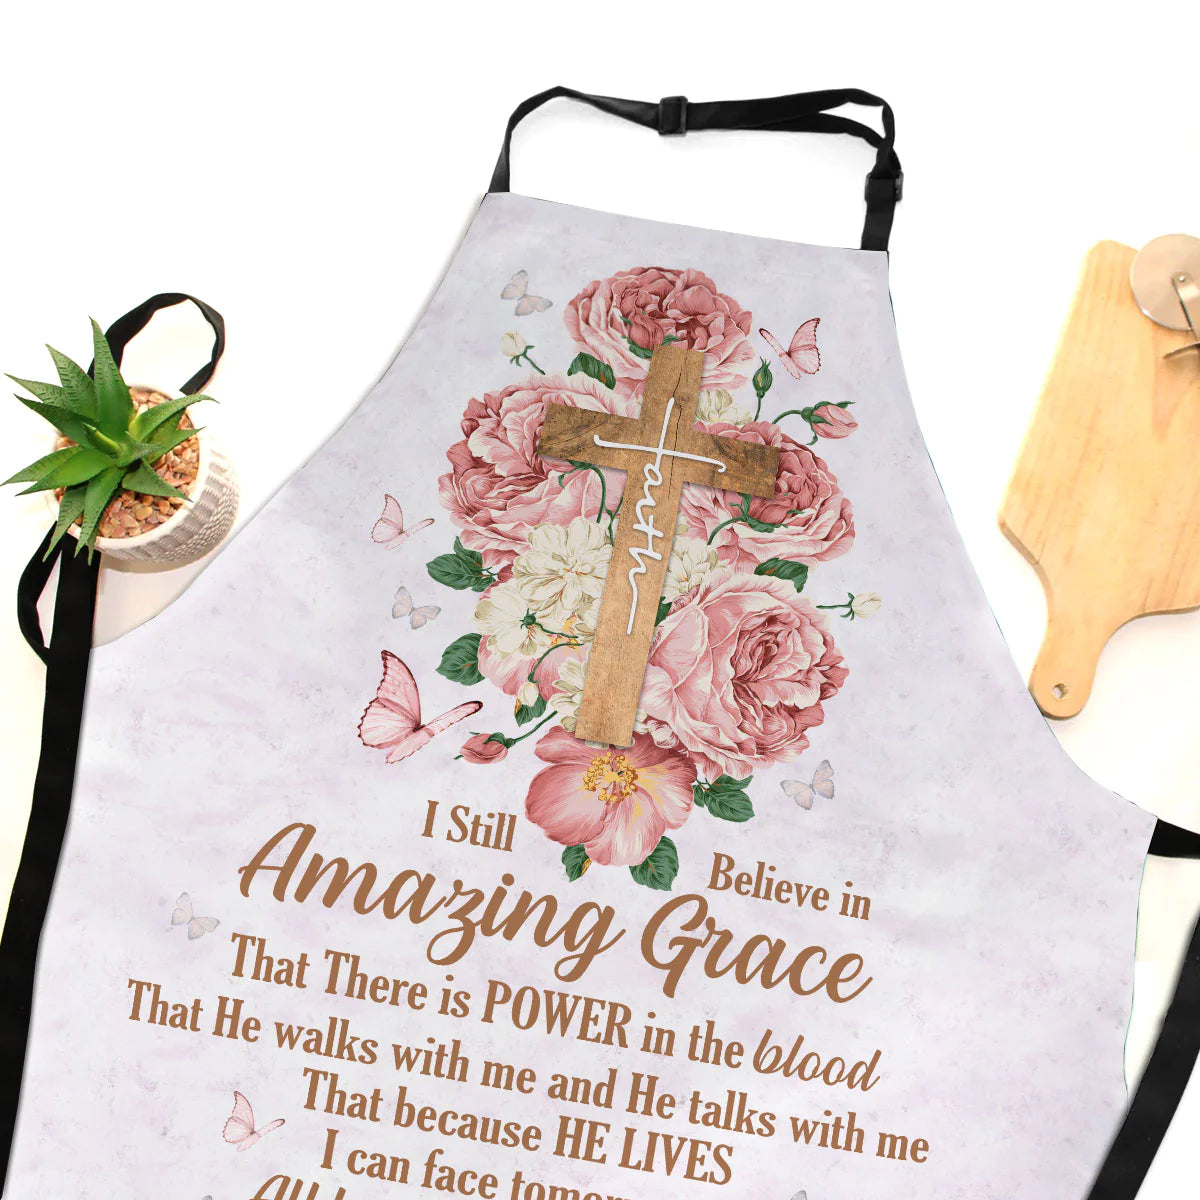 Christianartbag Apron, I Still Believe In Amazing Grace, Flower And Cross, Apron for Women, Gift For Women, Christmas Gift, - Christian Art Bag